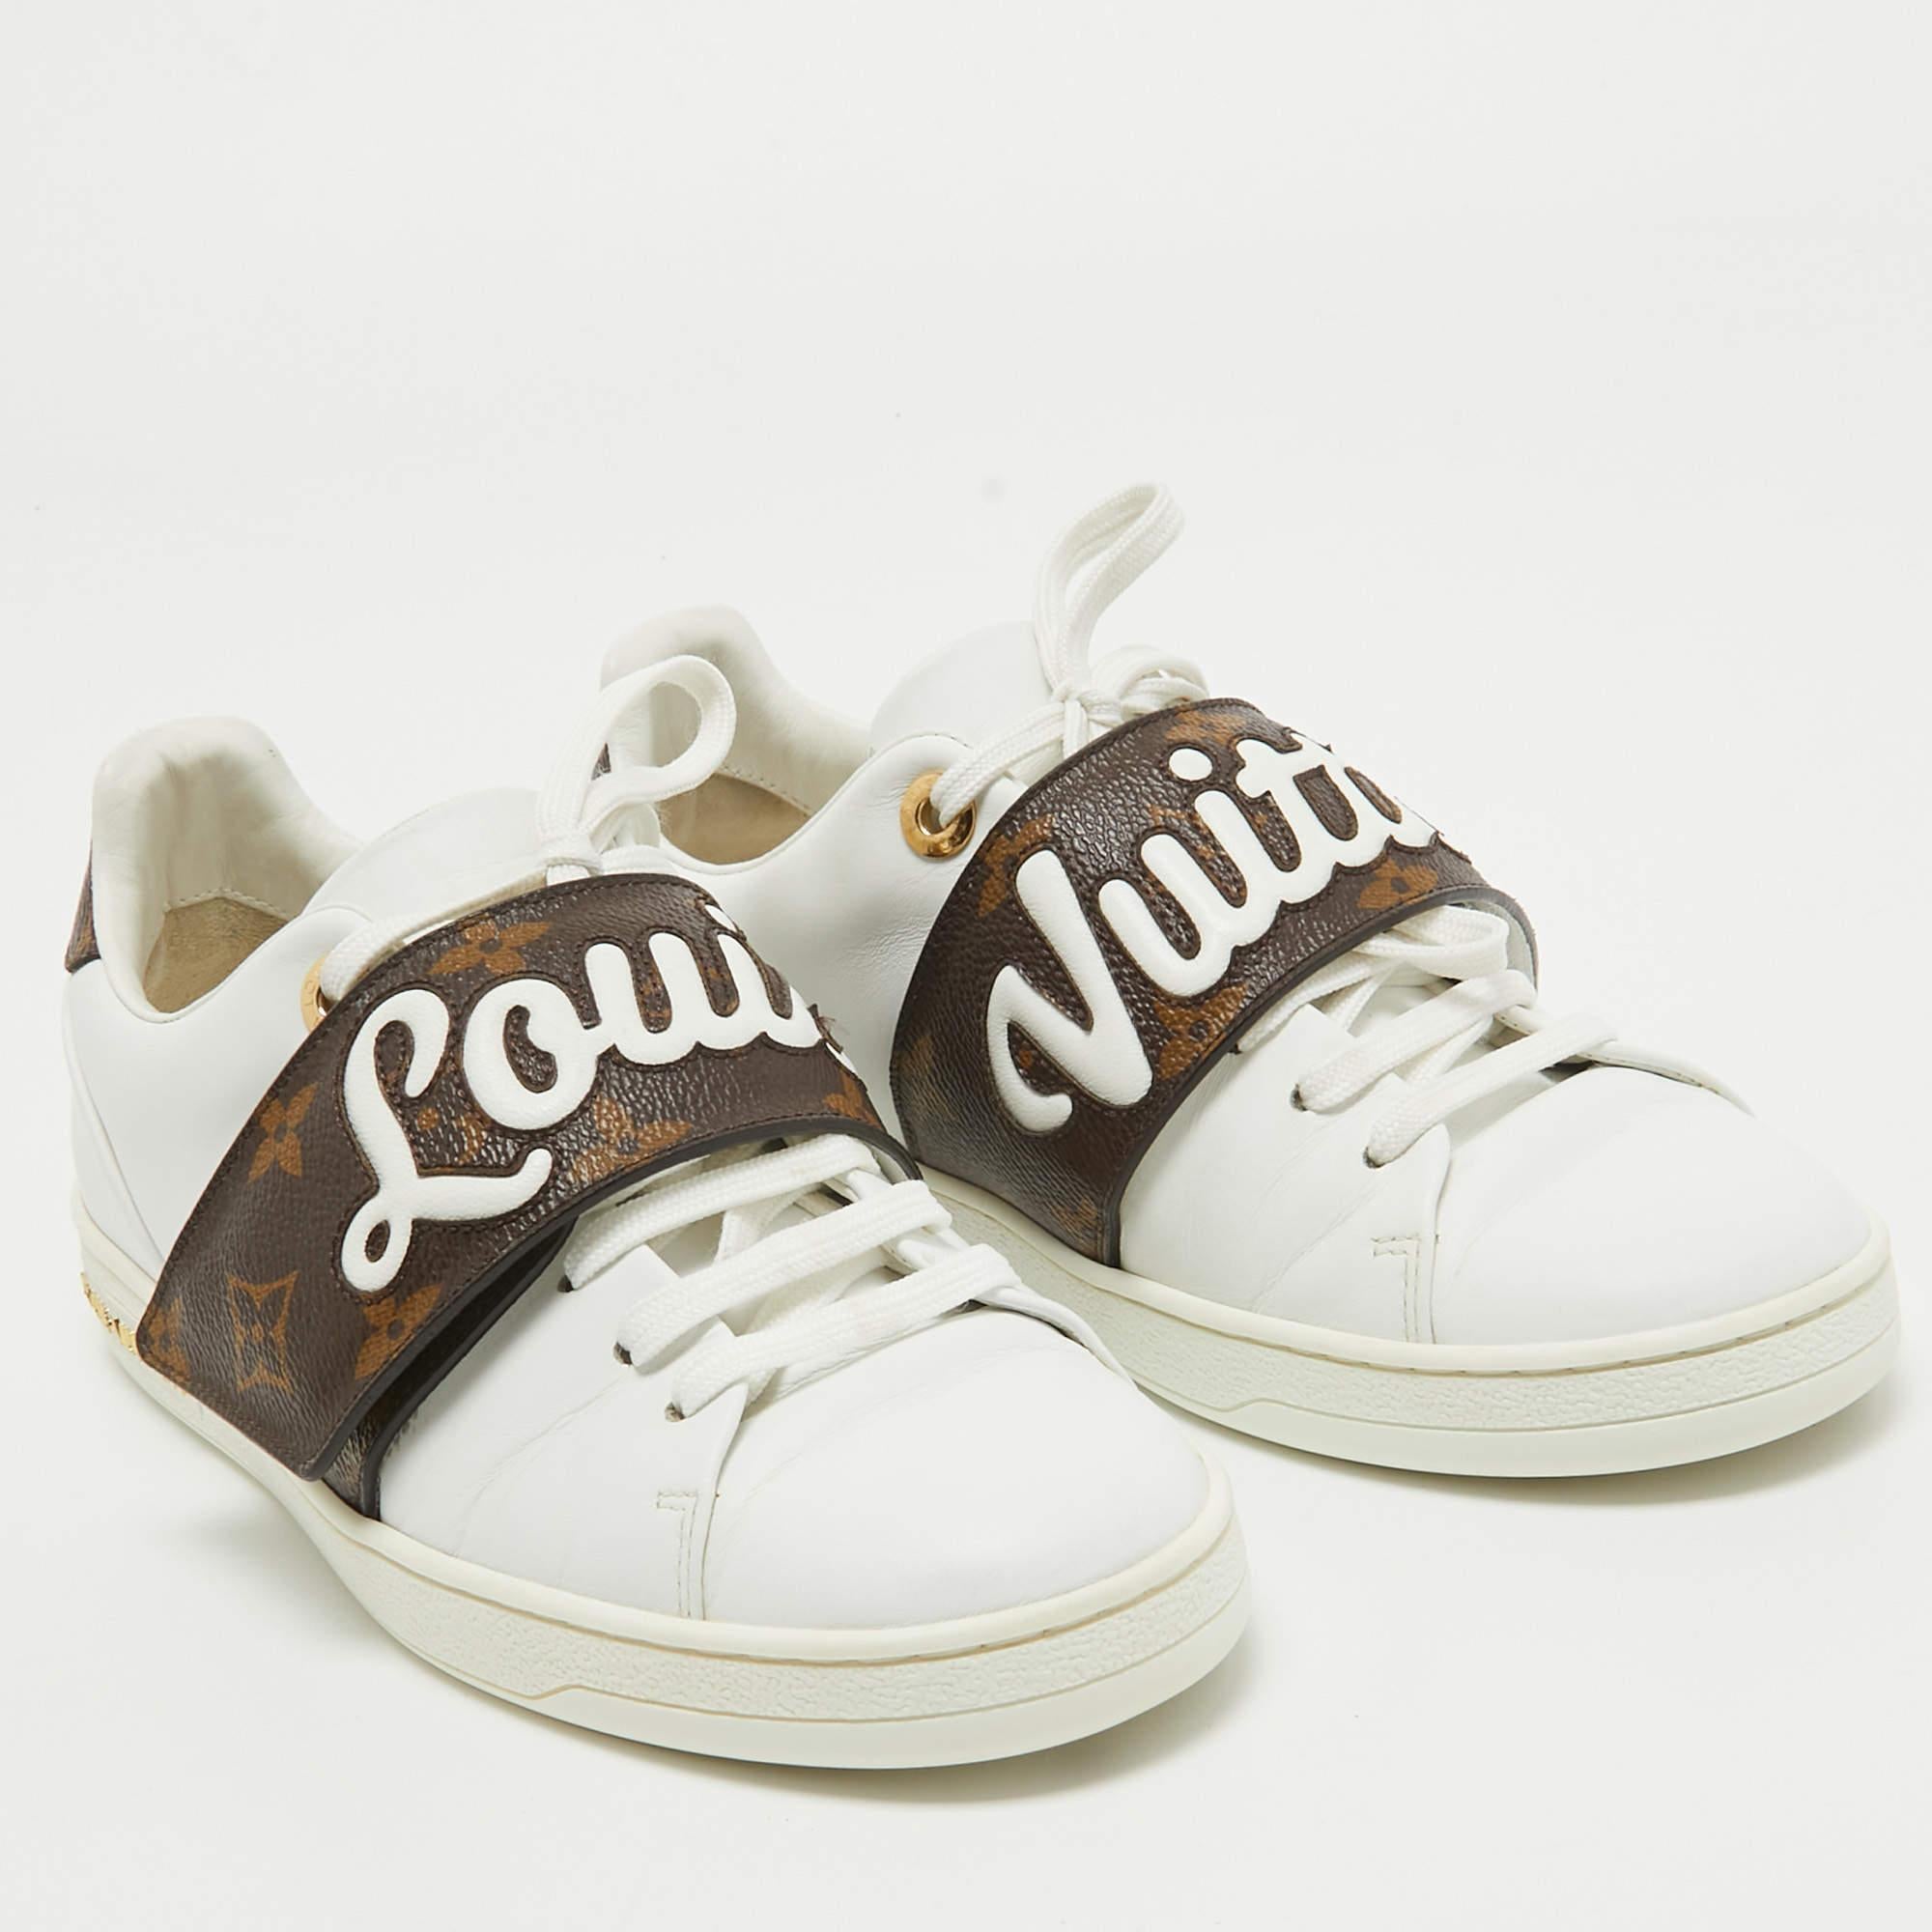 Louis Vuitton White/Brown Monogram Canvas and Leather Low Top Sneakers Size 35.5 In Good Condition For Sale In Dubai, Al Qouz 2